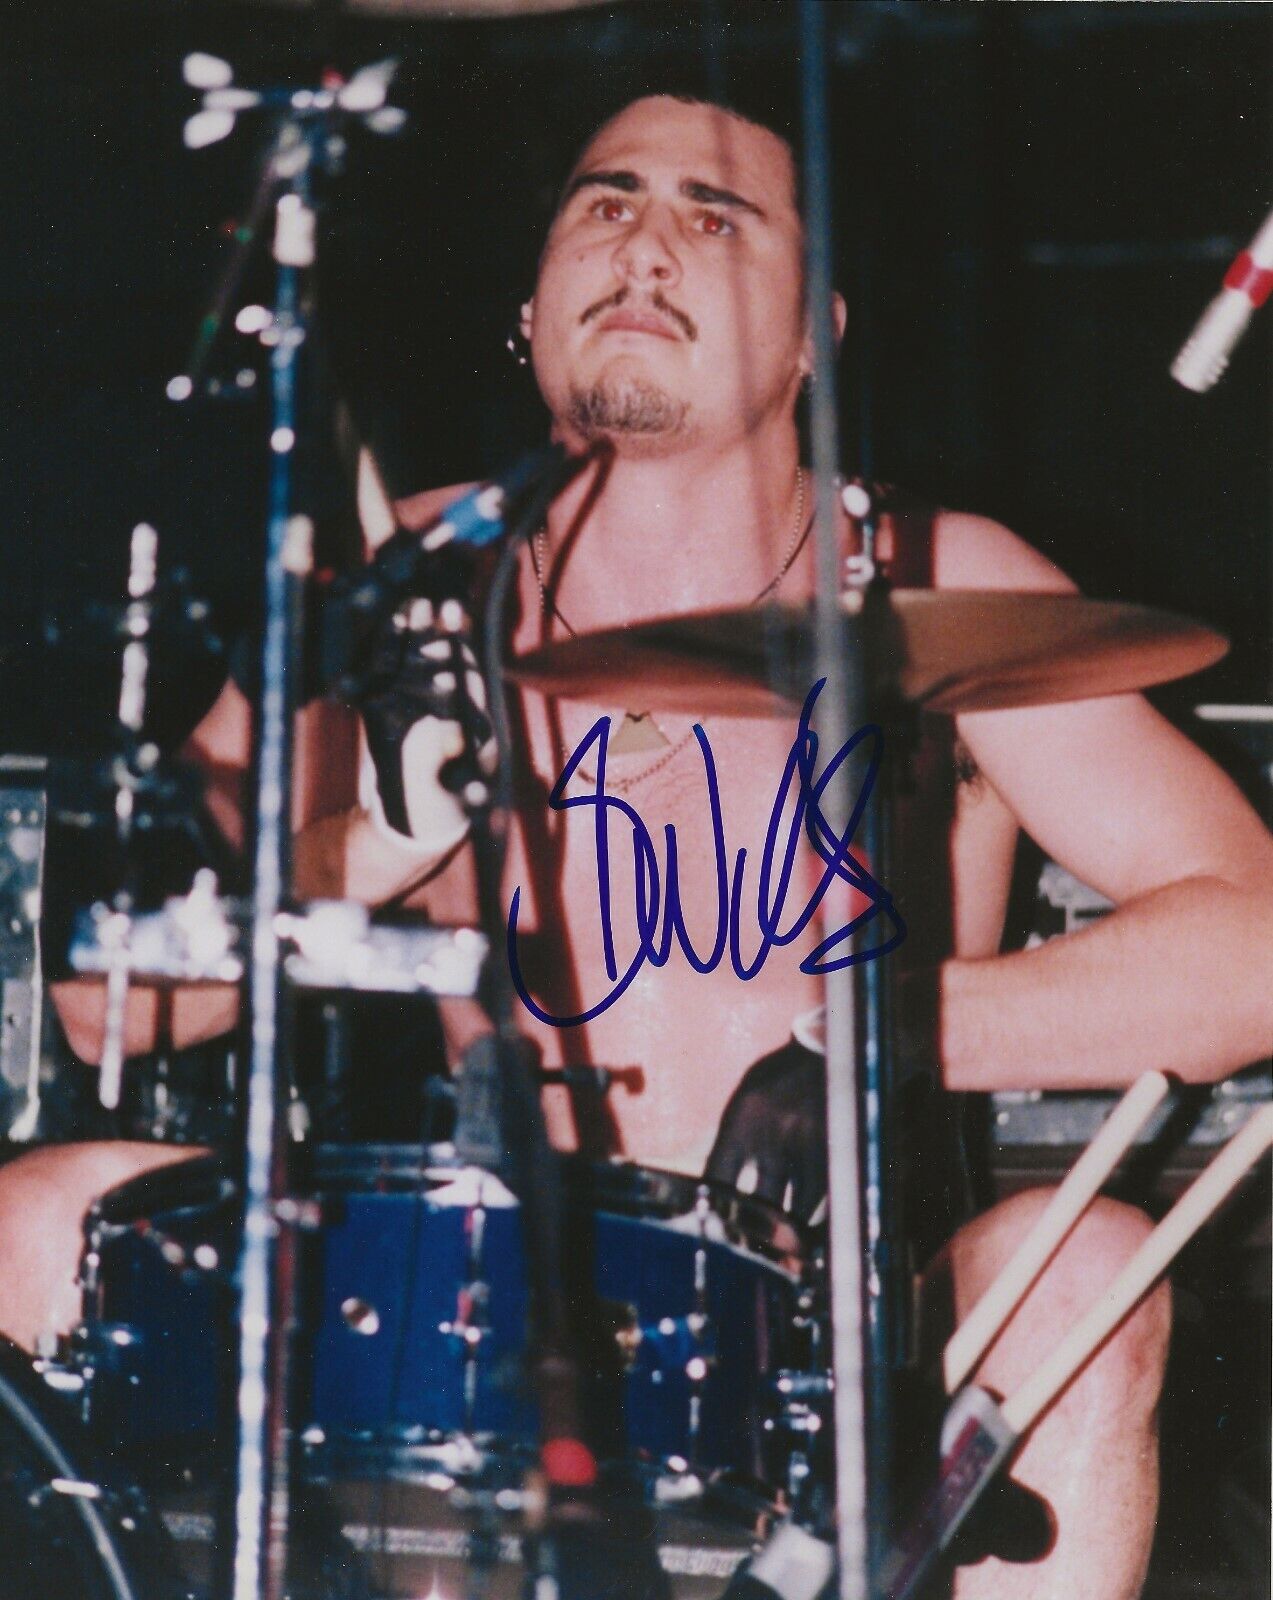 Brad Wilk of RAGE AGAINST THE MACHINE REAL hand SIGNED 8x10 Photo Poster painting #1 COA